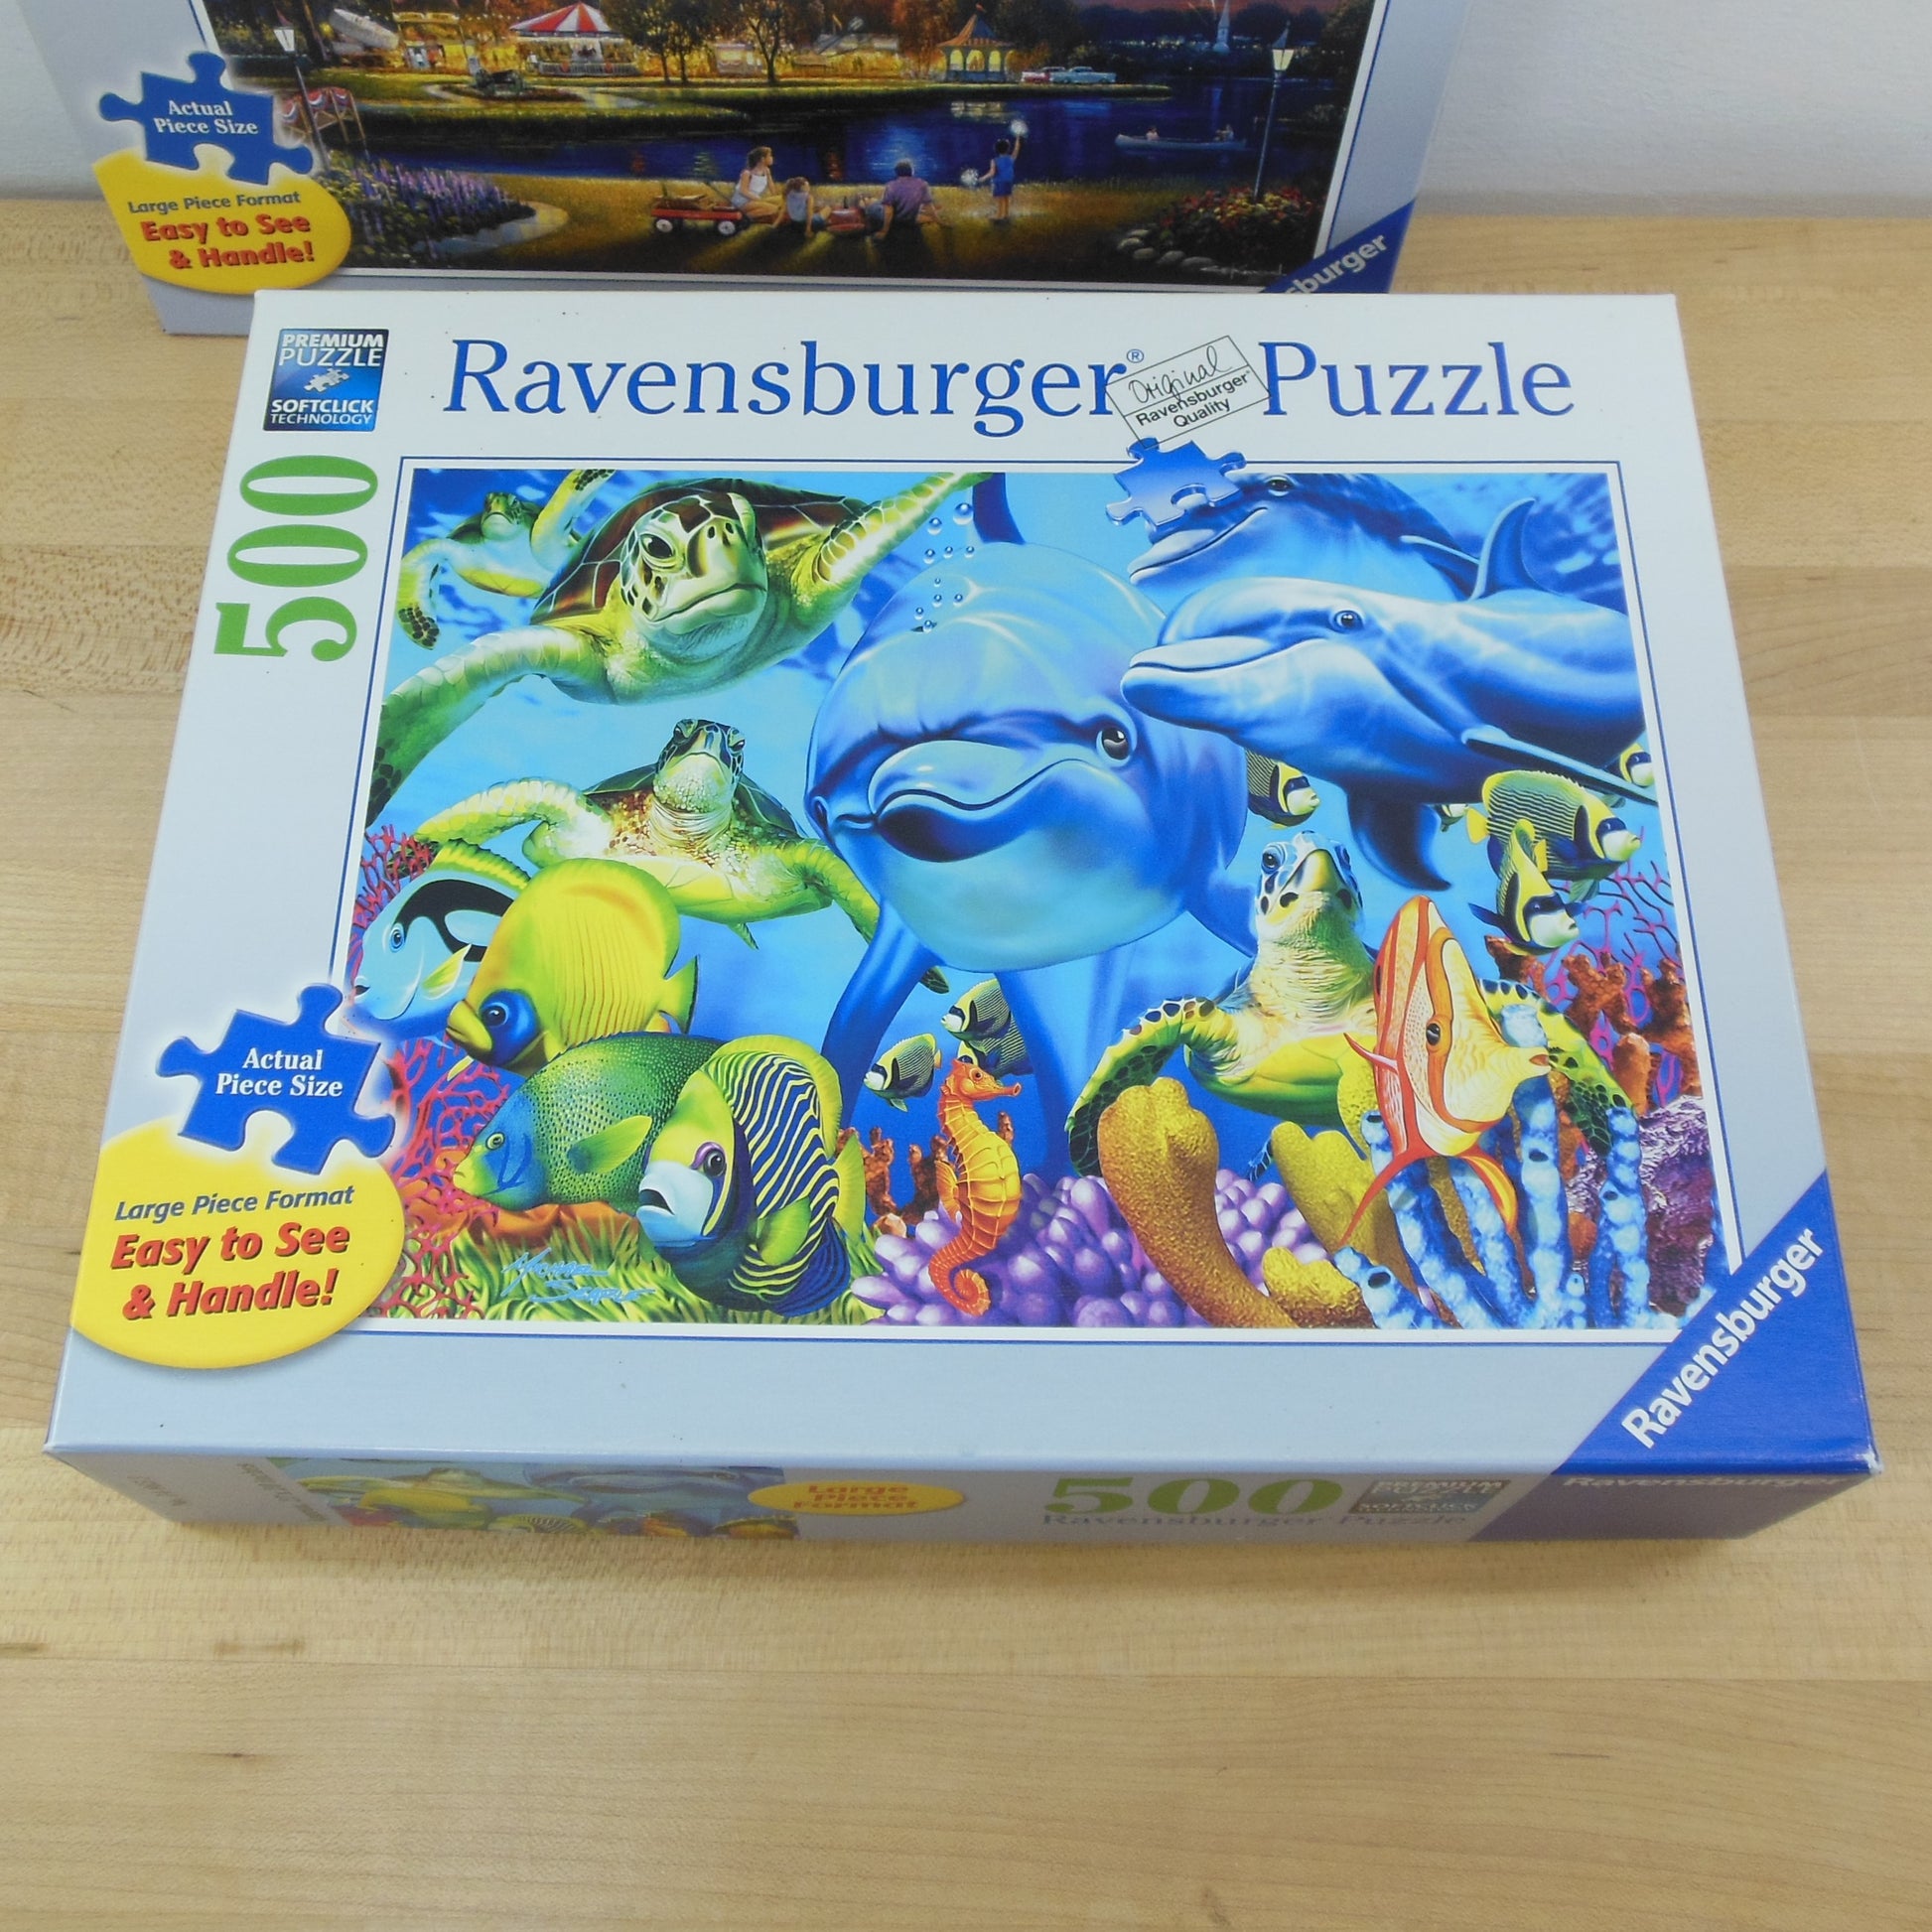 Ravensburger Puzzle 3 Lot 500 Large Pieces Star Spangled Underwater Smiles Butterflies Underwater Animals Sea Life